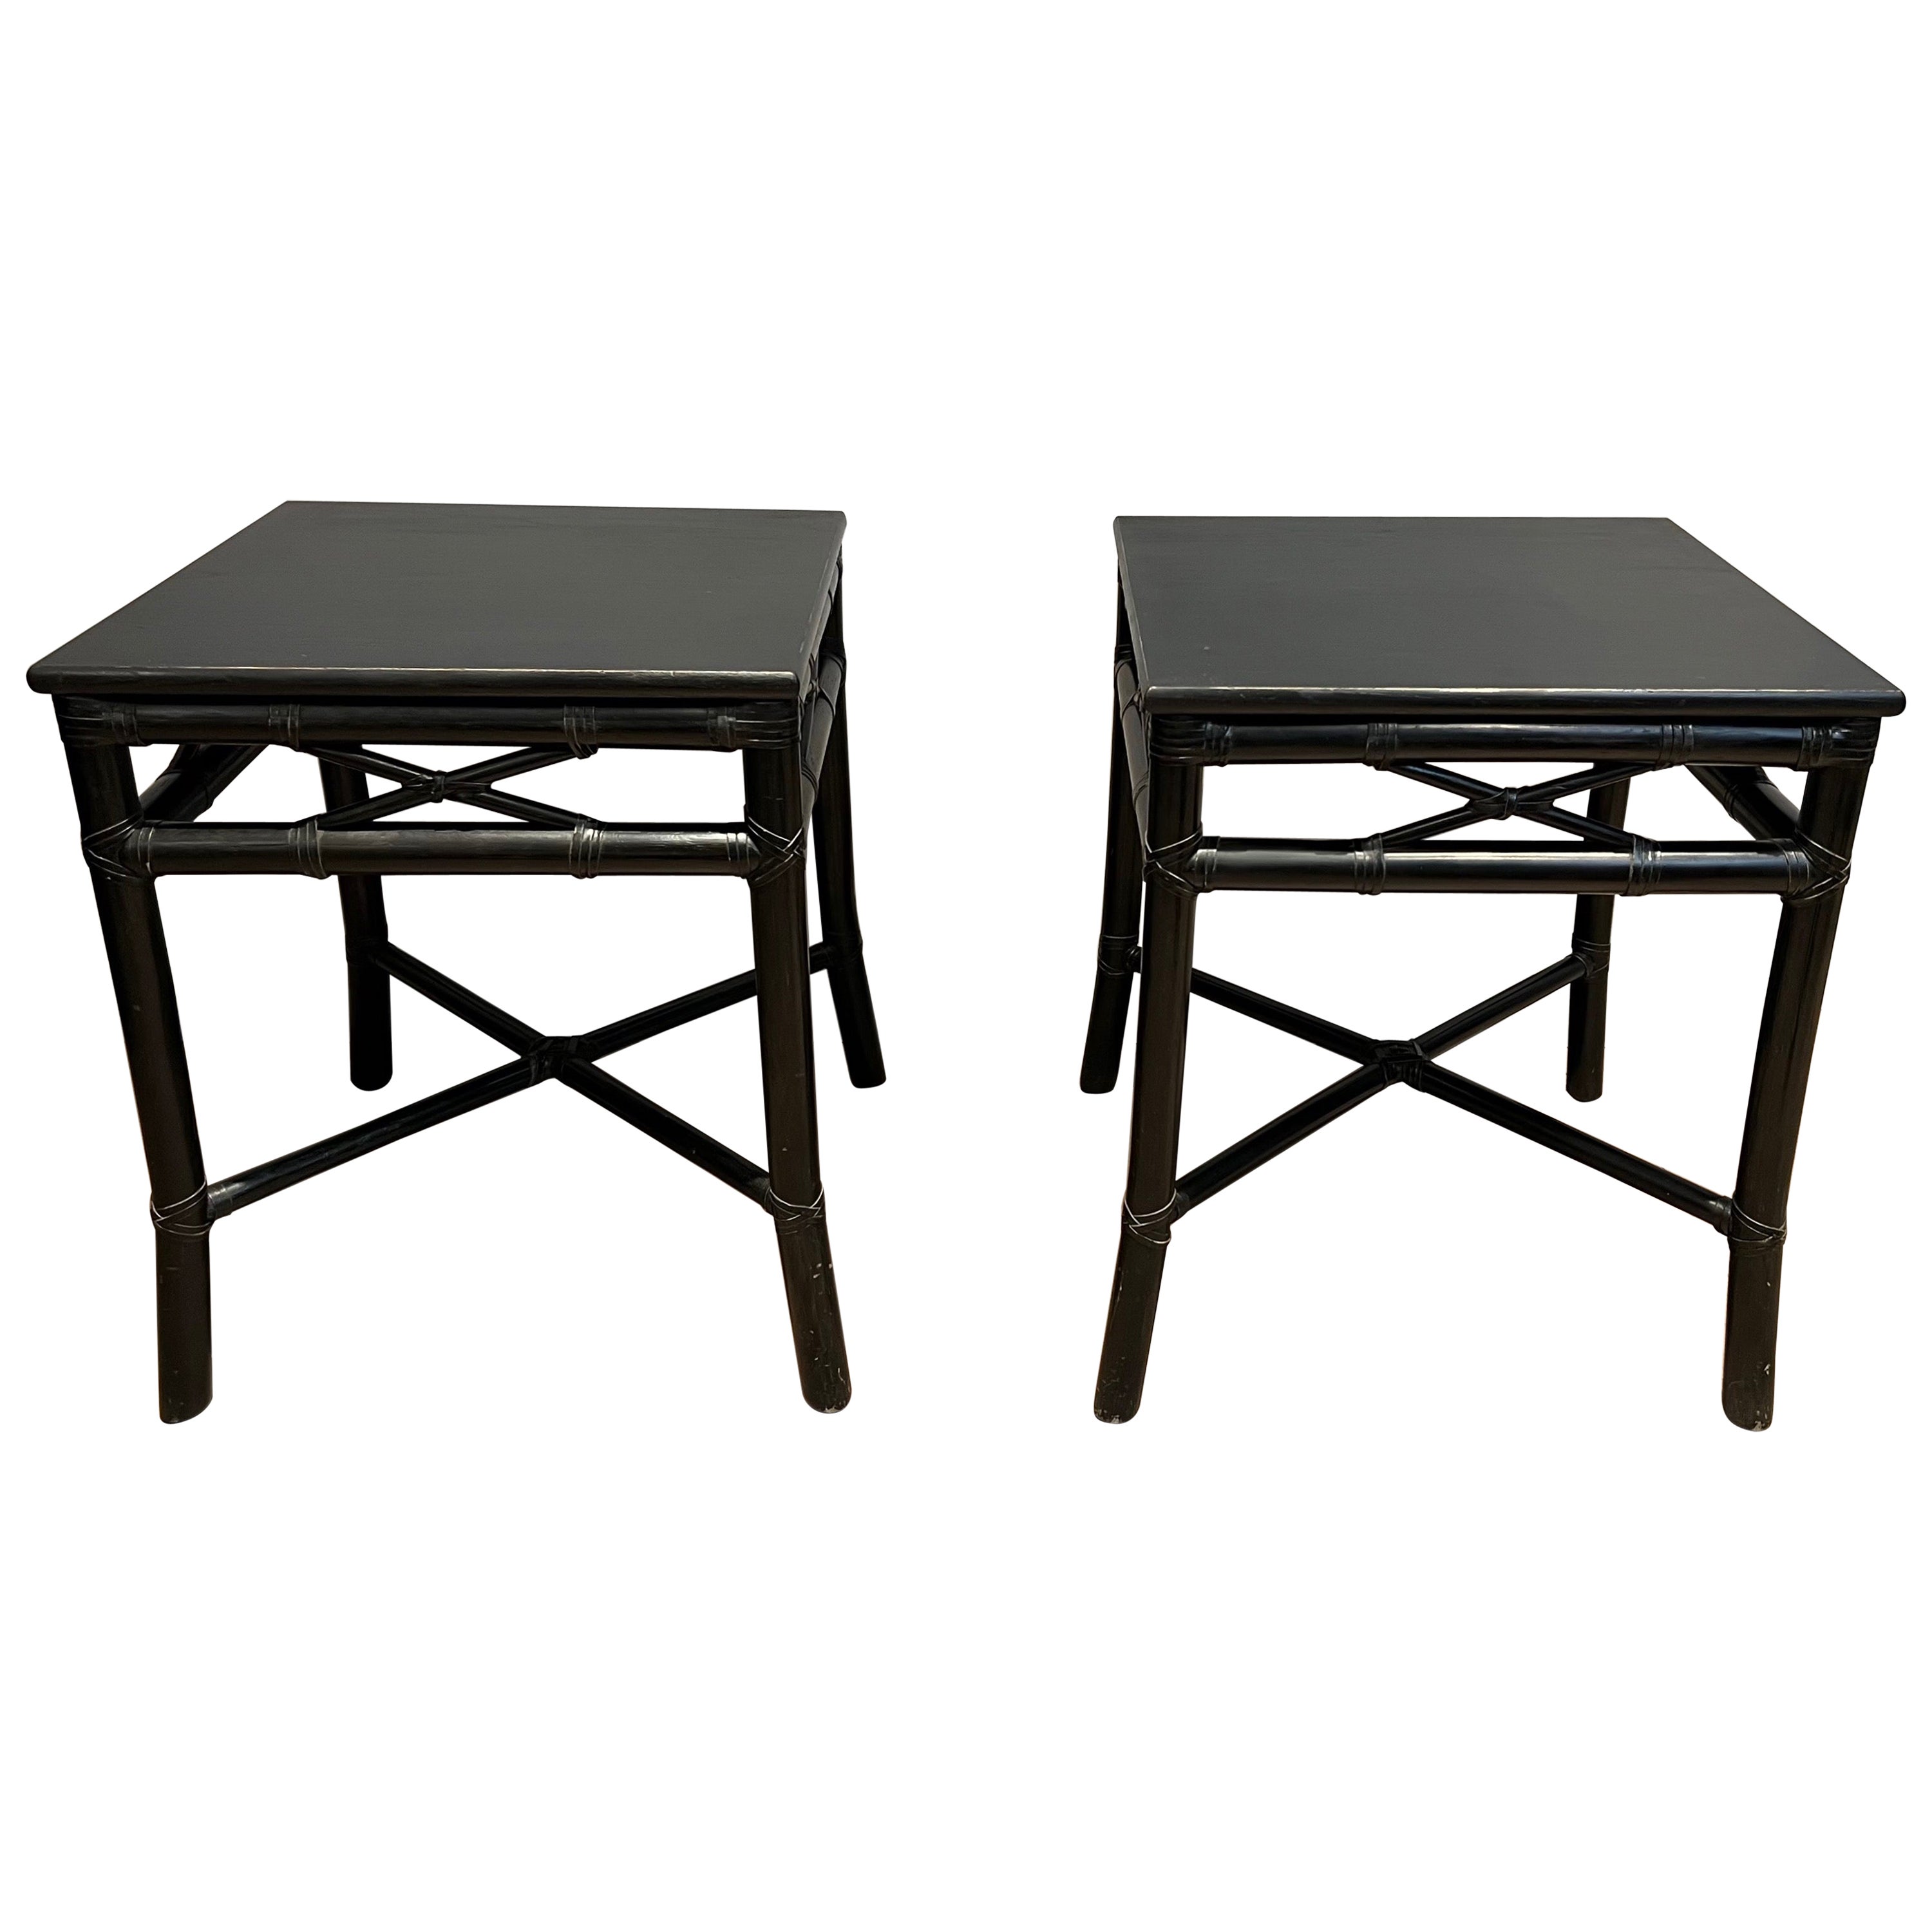 Pair of Black Lacquered Faux-Bamboo Side Tables by Gasparucci For Sale